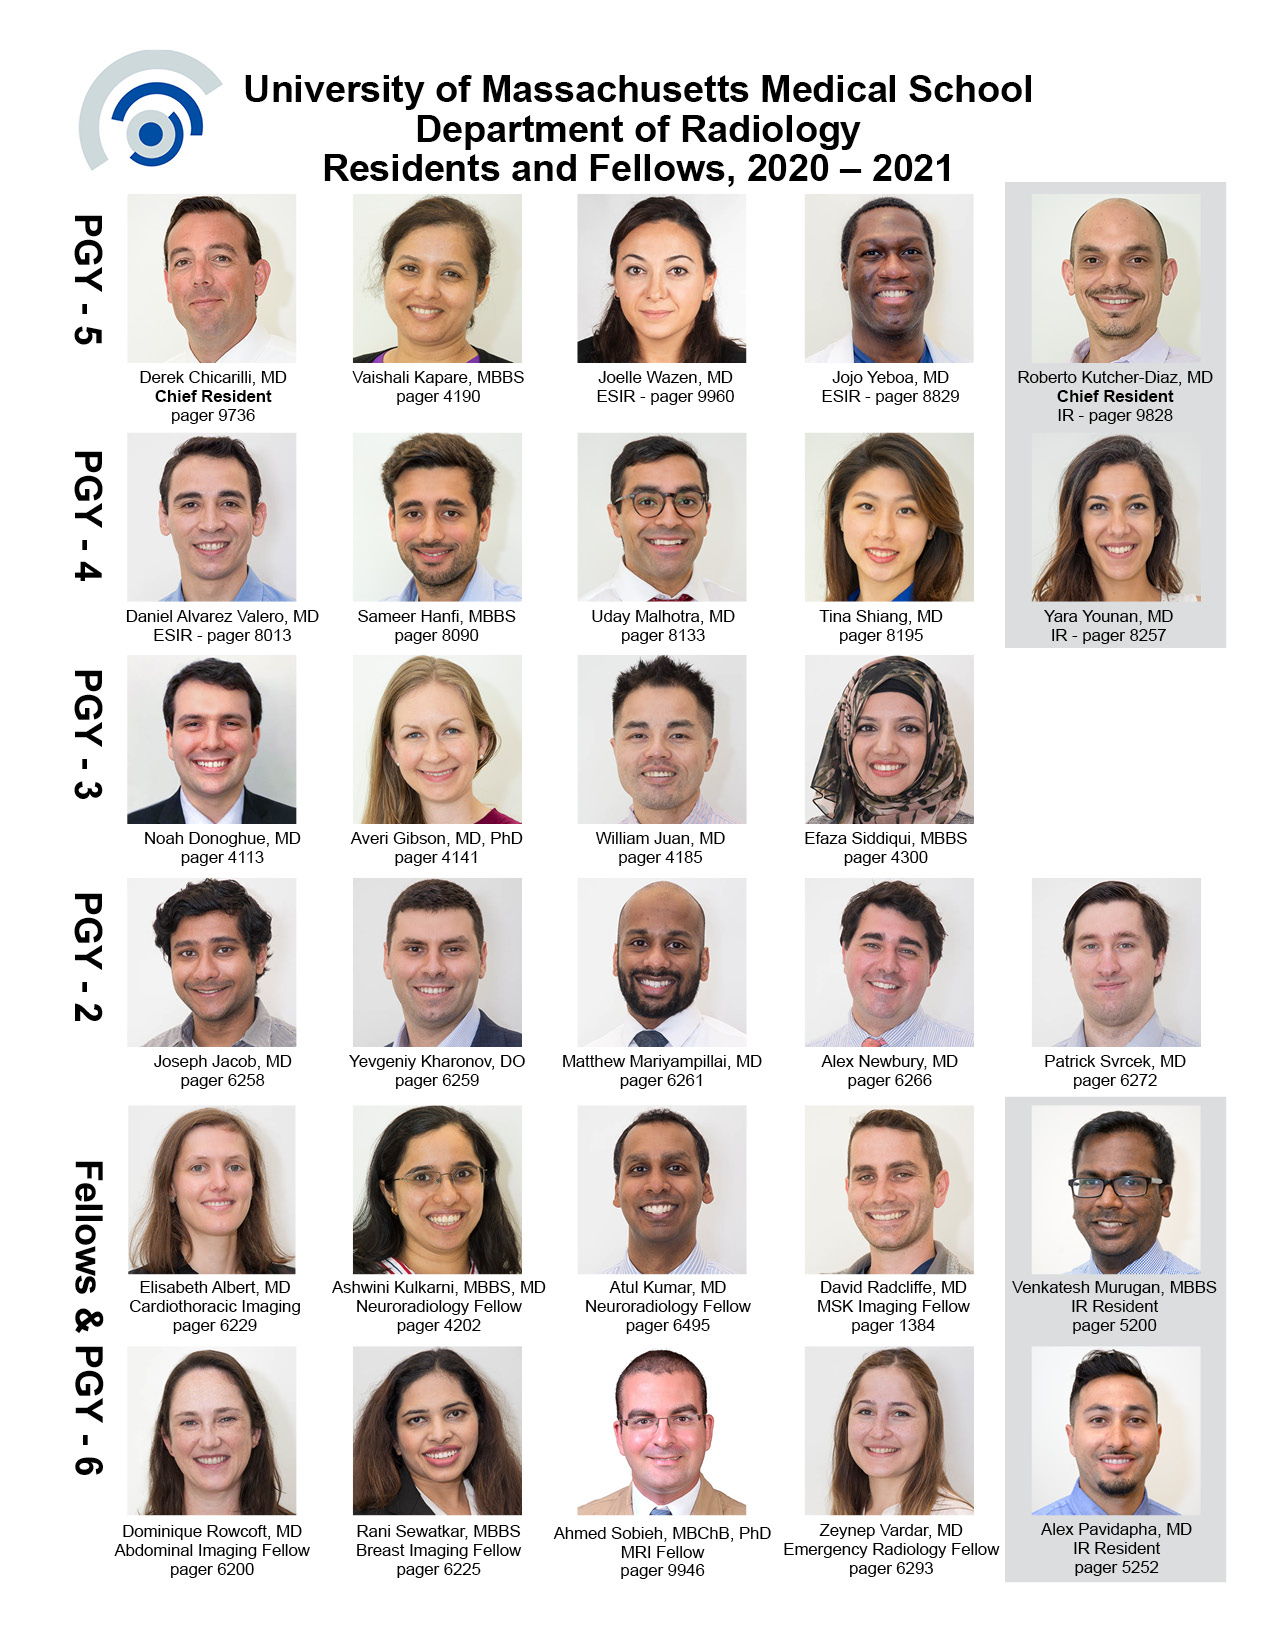 UMMS Radiology Residents and Fellows 2020-2021